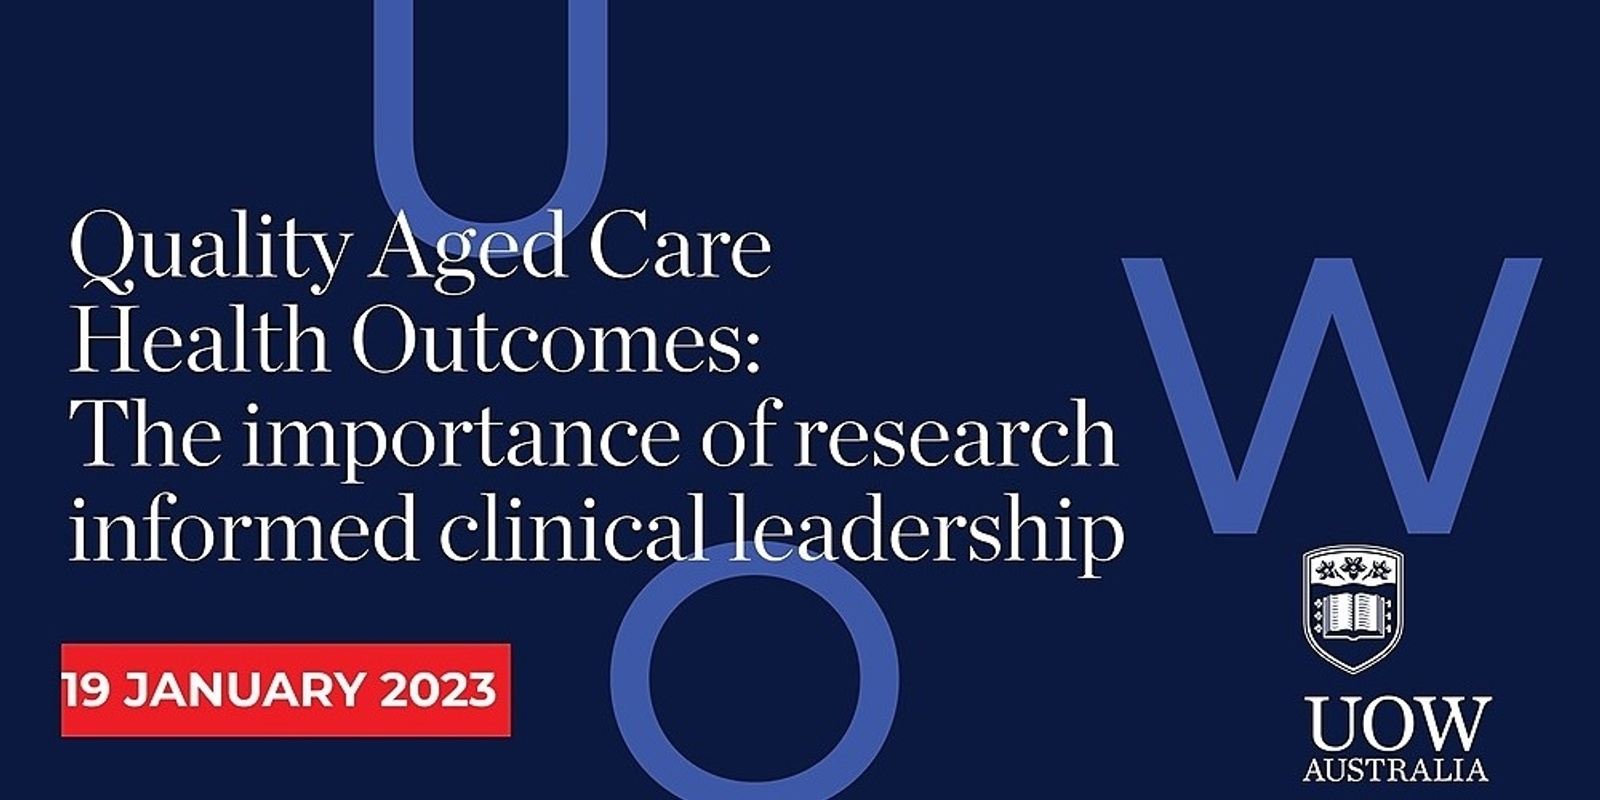 Banner image for Quality Aged Care Health Outcomes: The importance of research informed clinical leadership 